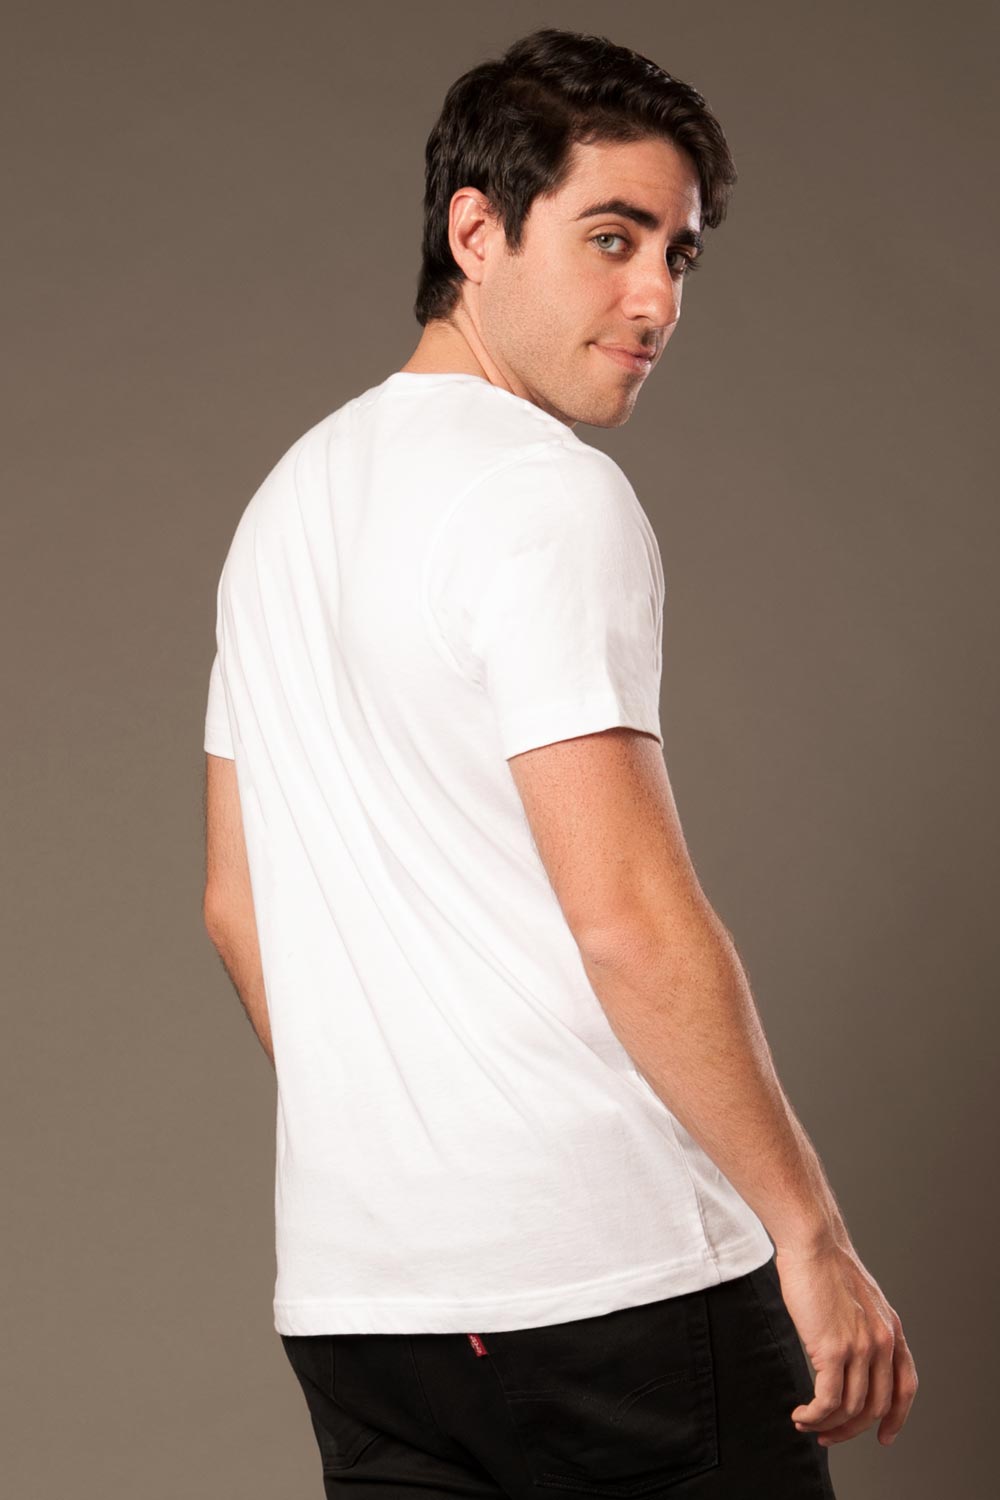 OYS -  Final Sale - Men's Signature T-shirt in White by Traci Lords